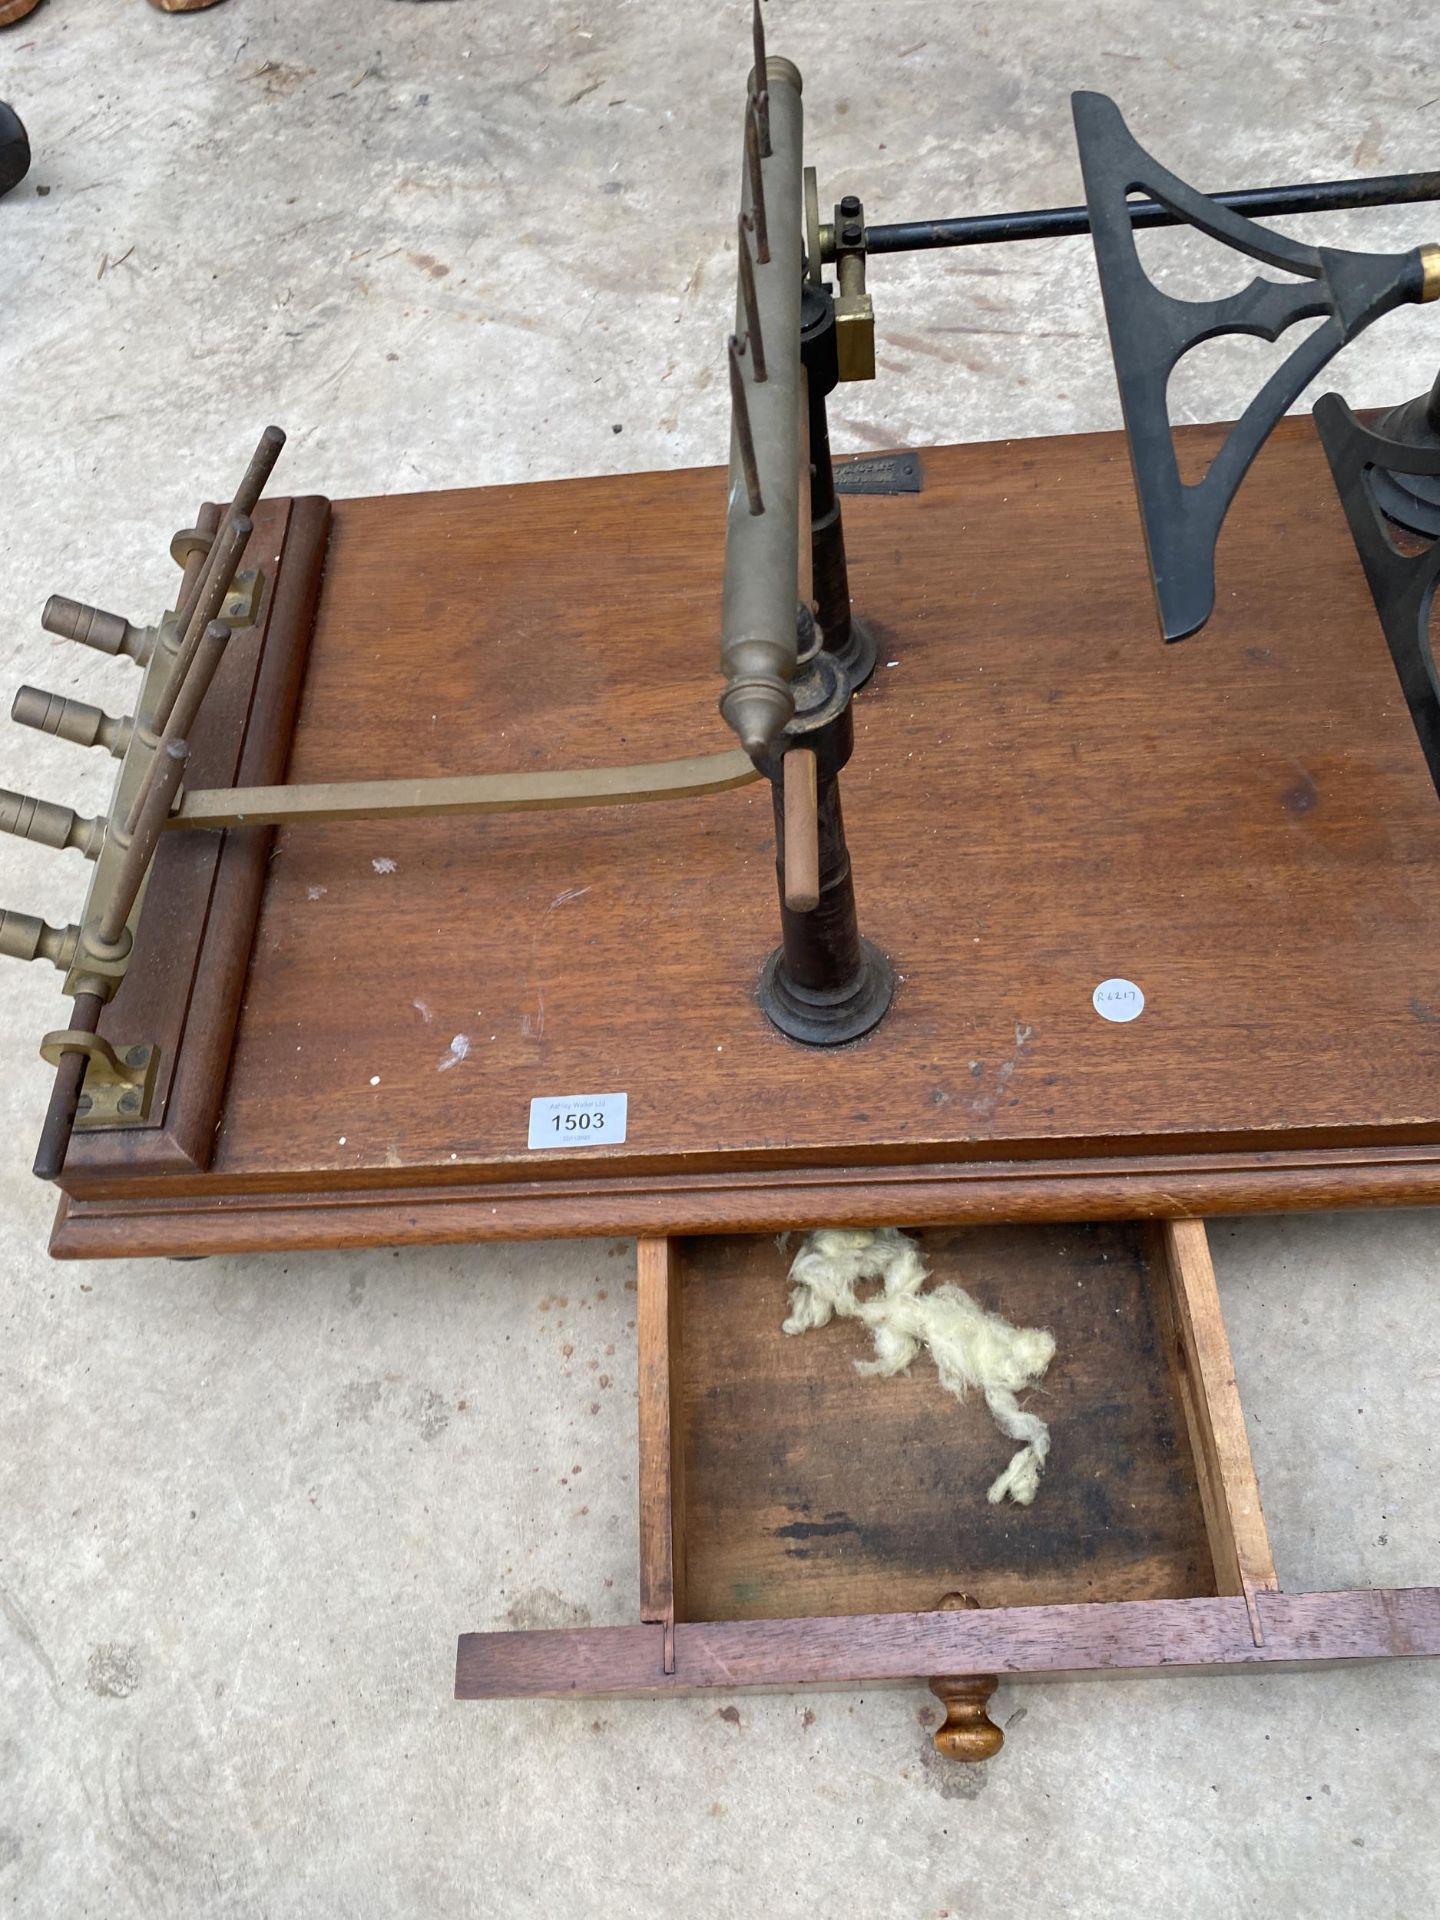 A VINTAGE INDUSTRIAL SCRATCH BUILT YARN SPINNING MACHINE BEARING THE NAME GOODBRAND & CO LTD - Image 7 of 8